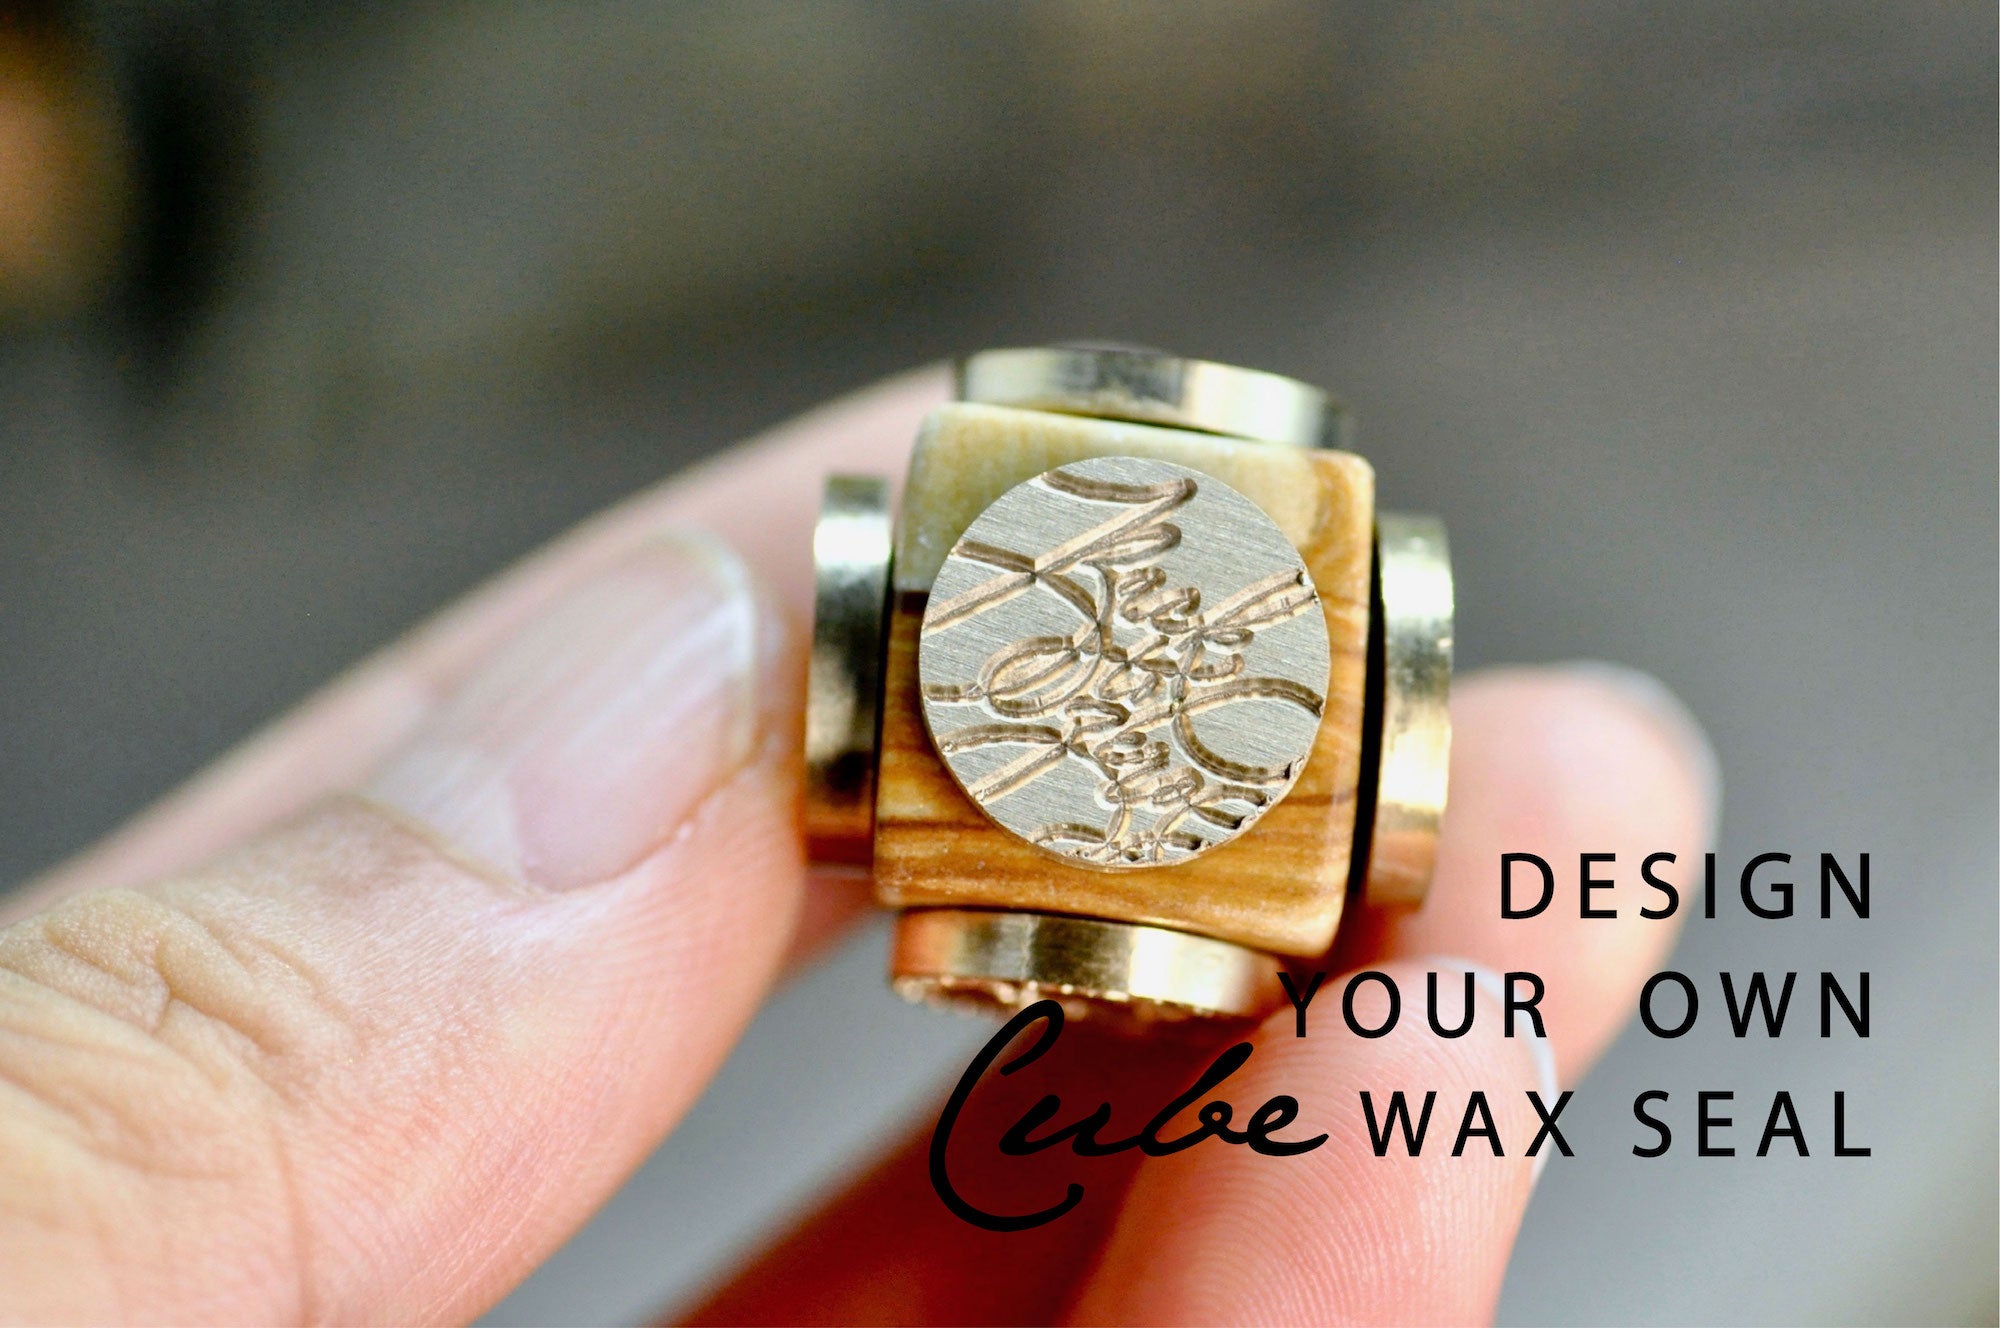 OOAK Design Your Own Cube Wax Seal | Picture Jasper